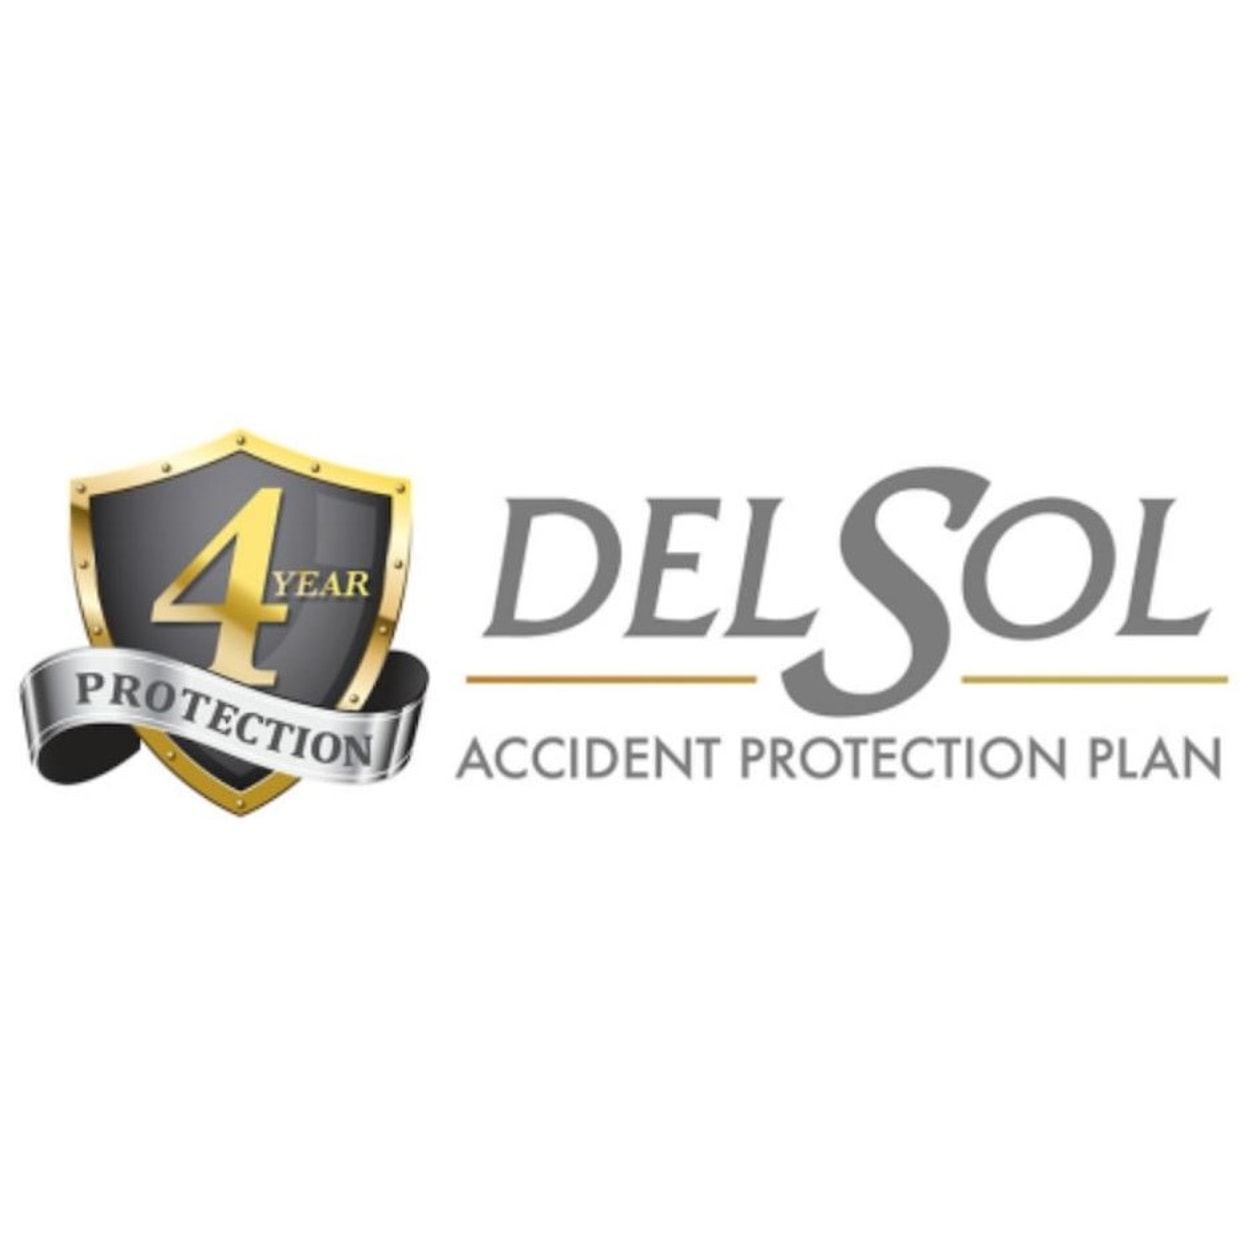 DS Del Sol Protection Plan 4YR PP -  $1501 to  $1,750